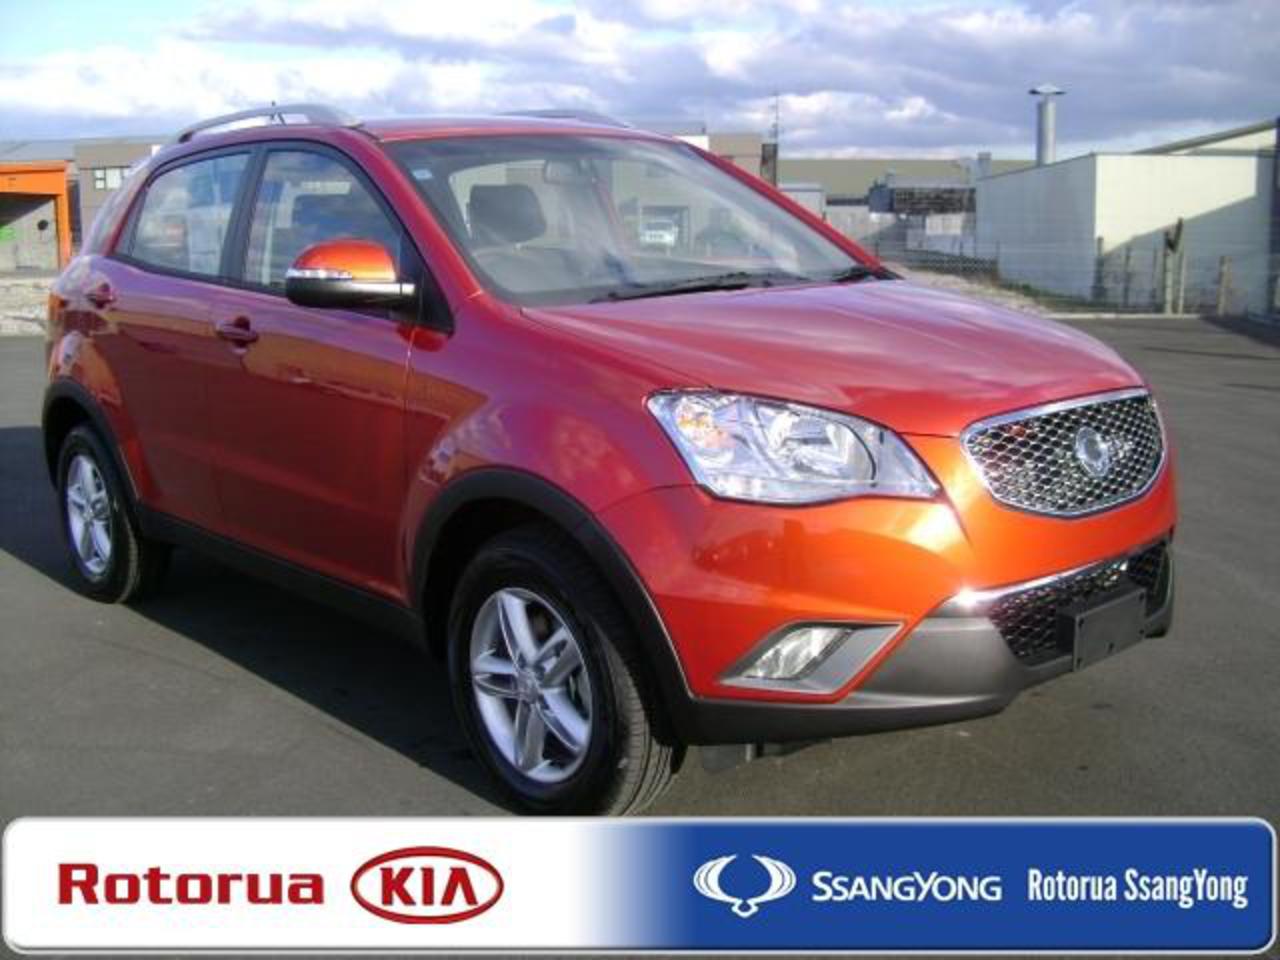 Ssangyong Korando 230 TDi pictures · < Previous. Link to this page: